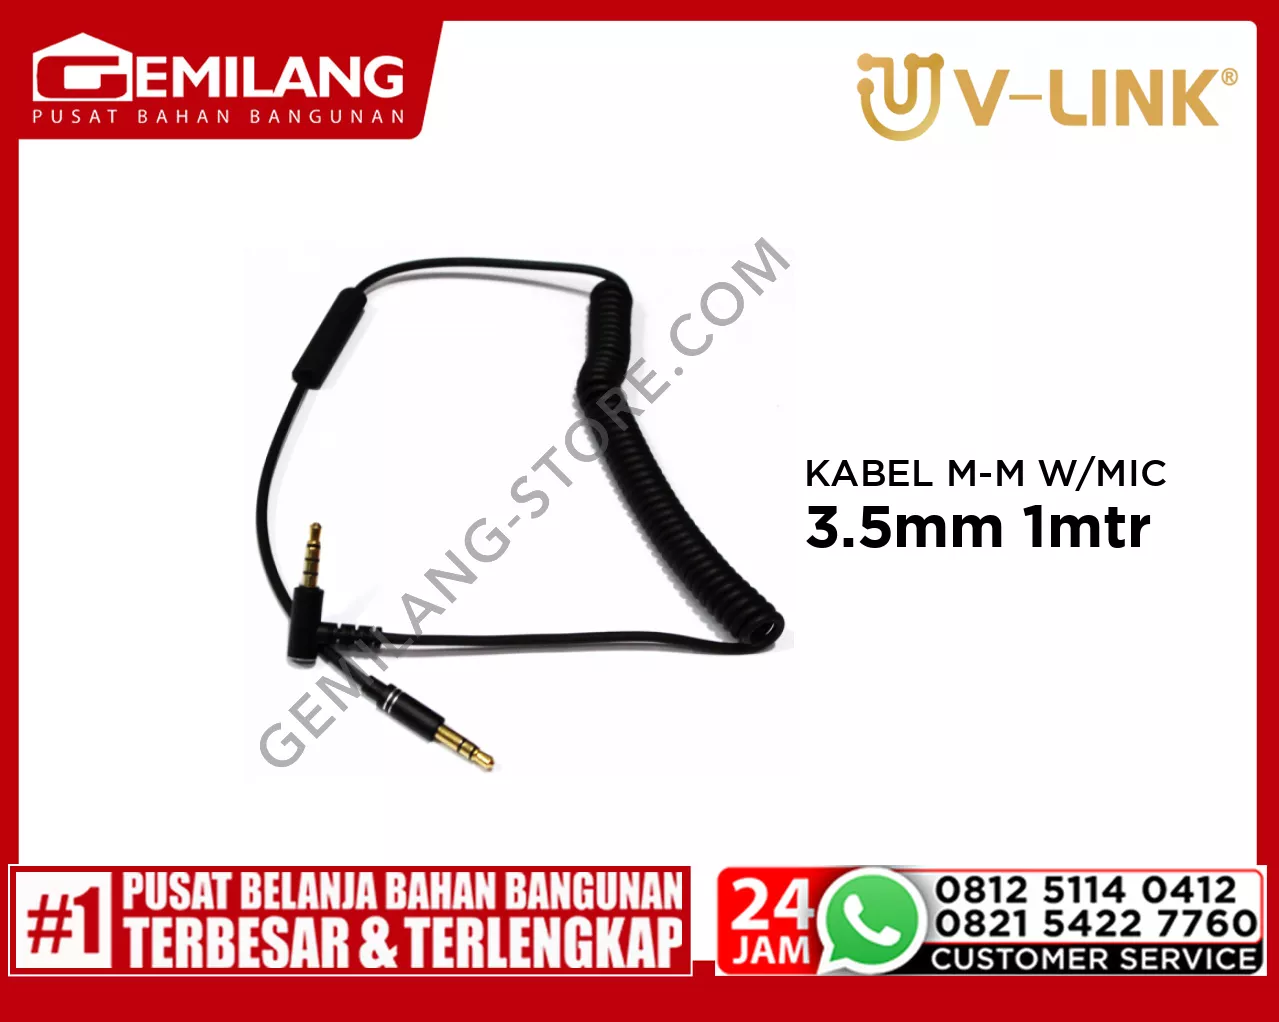 V-LINK KABEL MALE LURUS TO MALE TEKUK BLACK WITH MIC AWS 3.5mm 1mtr